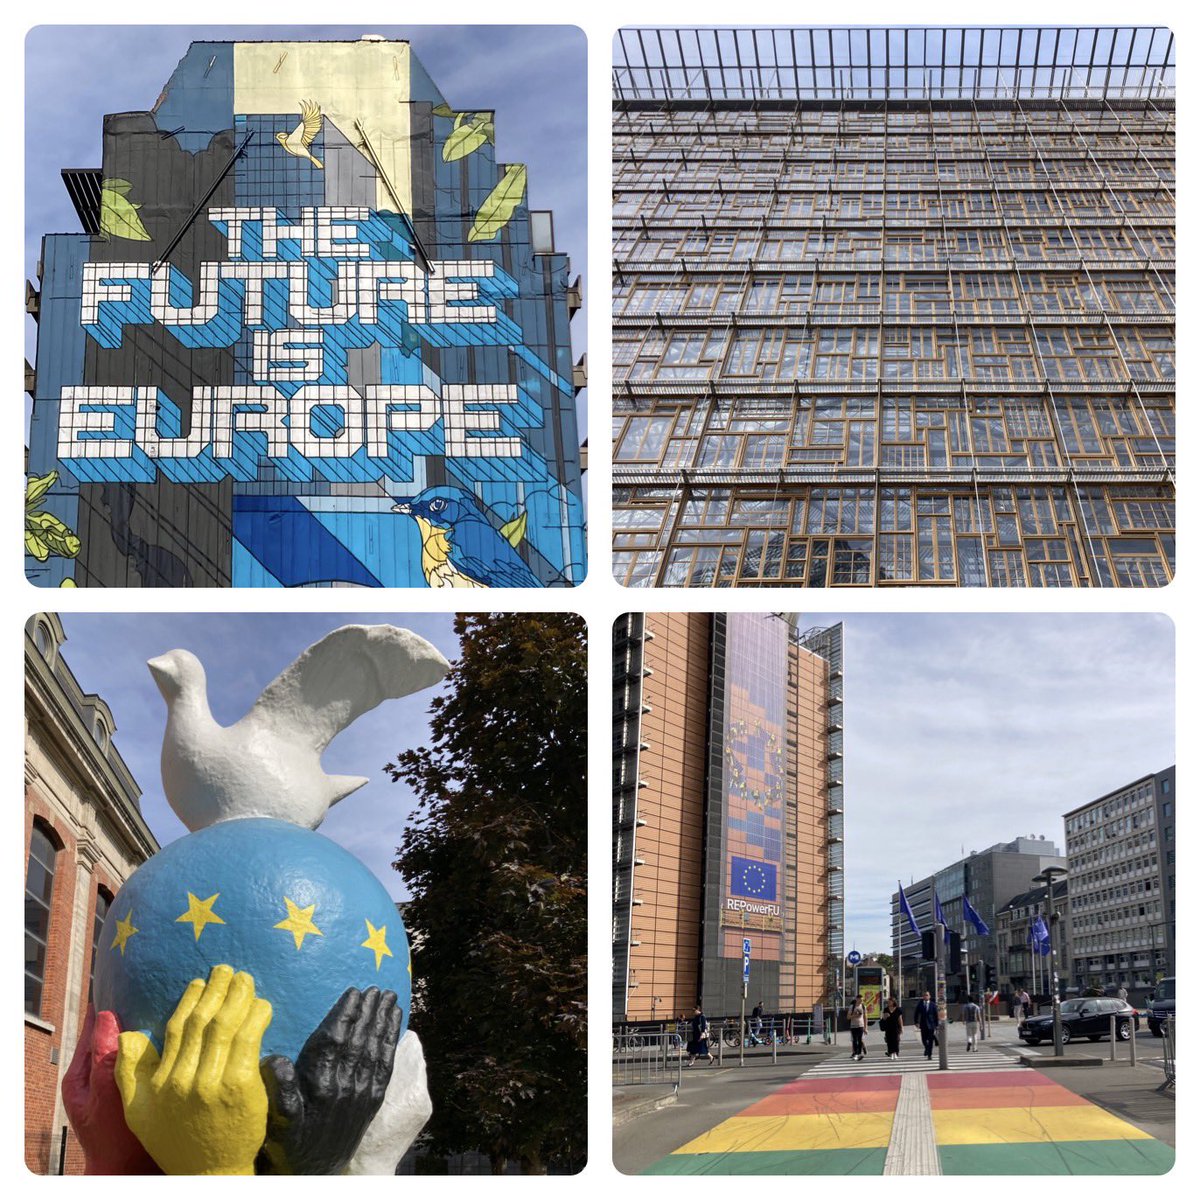 It's always good to be back in #Brussels for field research. This week it's all about the @eu_eeas perspective on developments in #EuropeanSecurity and related to #StrategicAutonomy.